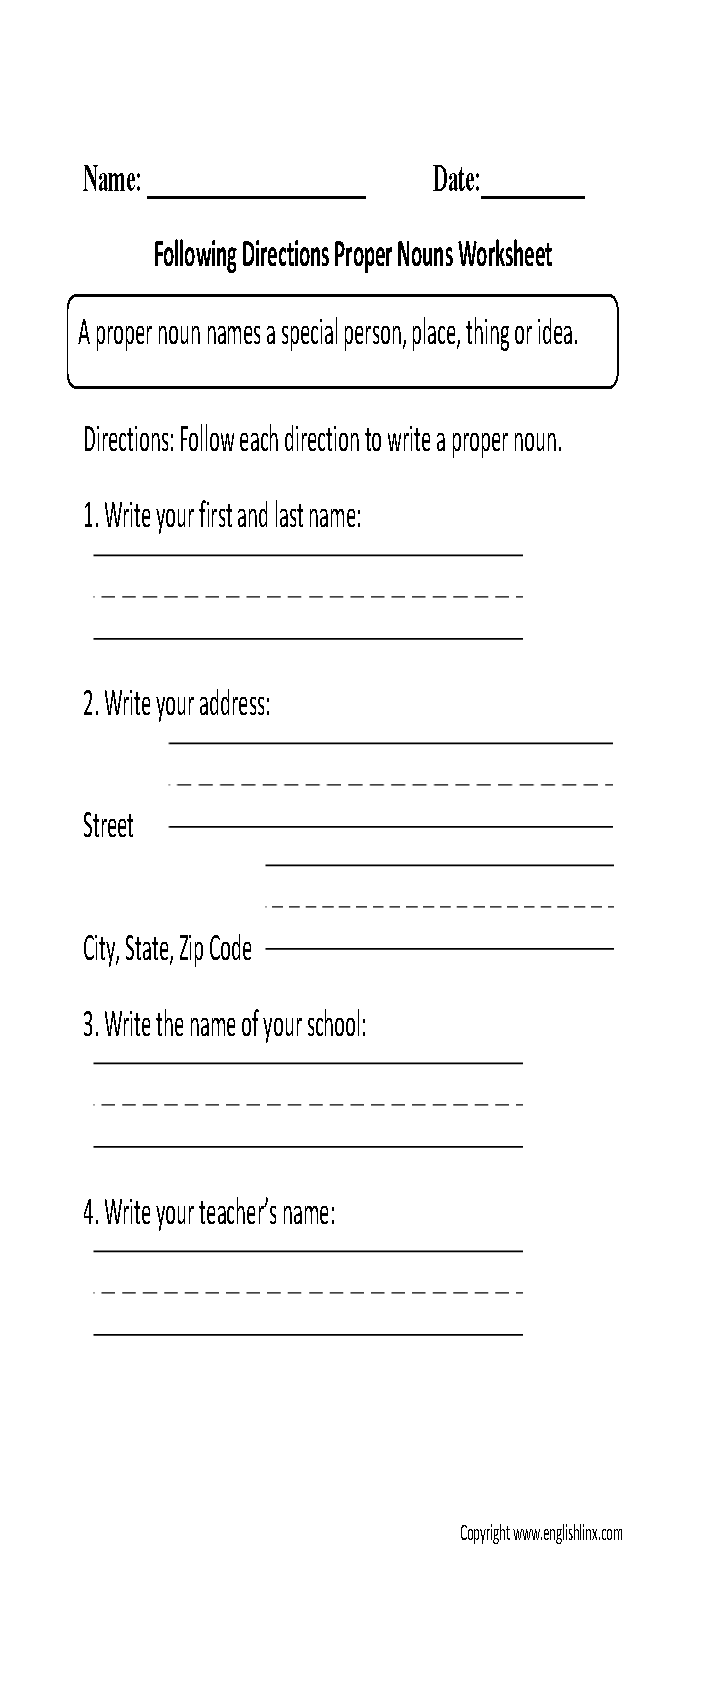 Nouns Worksheets  Proper and Common Nouns Worksheets math worksheets, worksheets, learning, printable worksheets, and grade worksheets Third Grade Noun Worksheets 1705 x 706